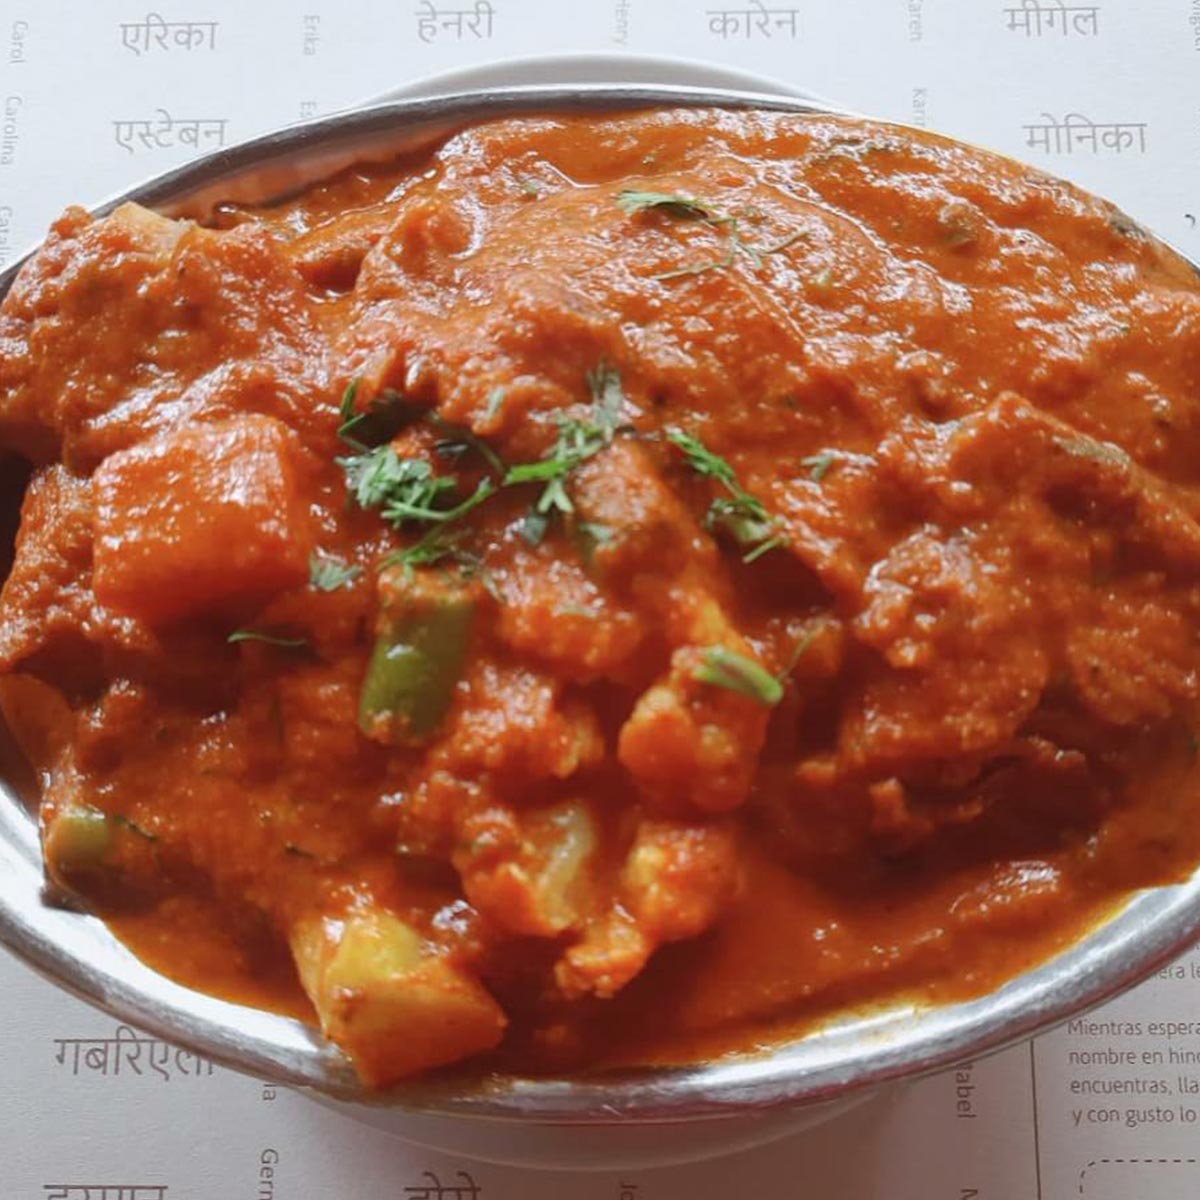 BENGAL FISH CURRY